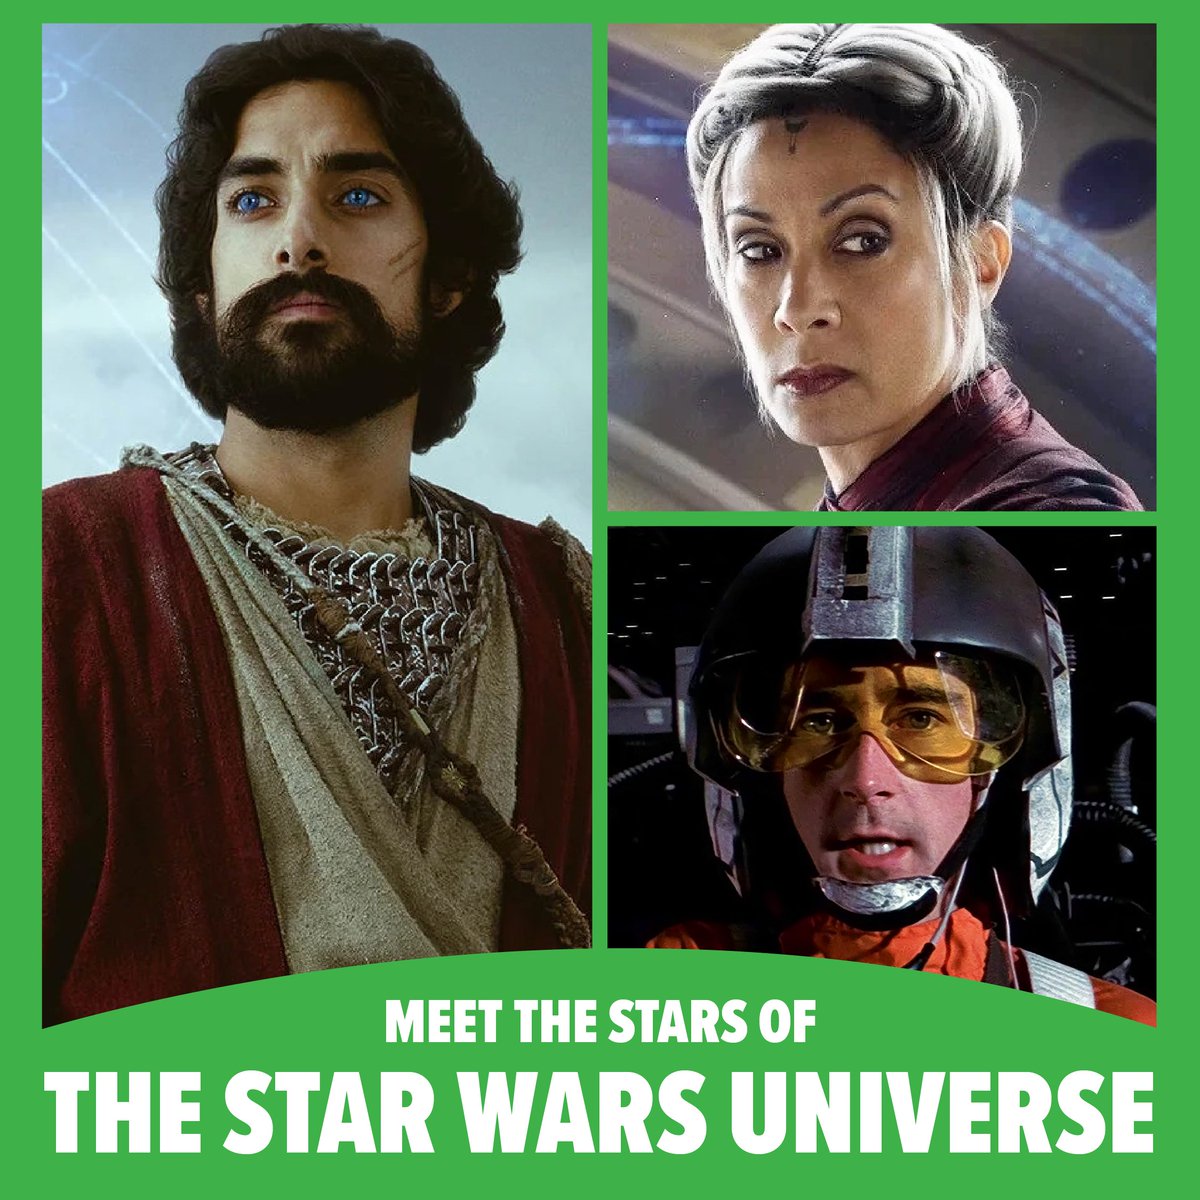 @rosariodawson Whether you're a fan of The Mandalorian, Rogue One: A Star Wars Story, Ahsoka, or the classic Star Wars movies, we've got celebrities you won't want to miss meeting at FAN EXPO Philadelphia. Tickets are on sale now. spr.ly/6013wEL8v